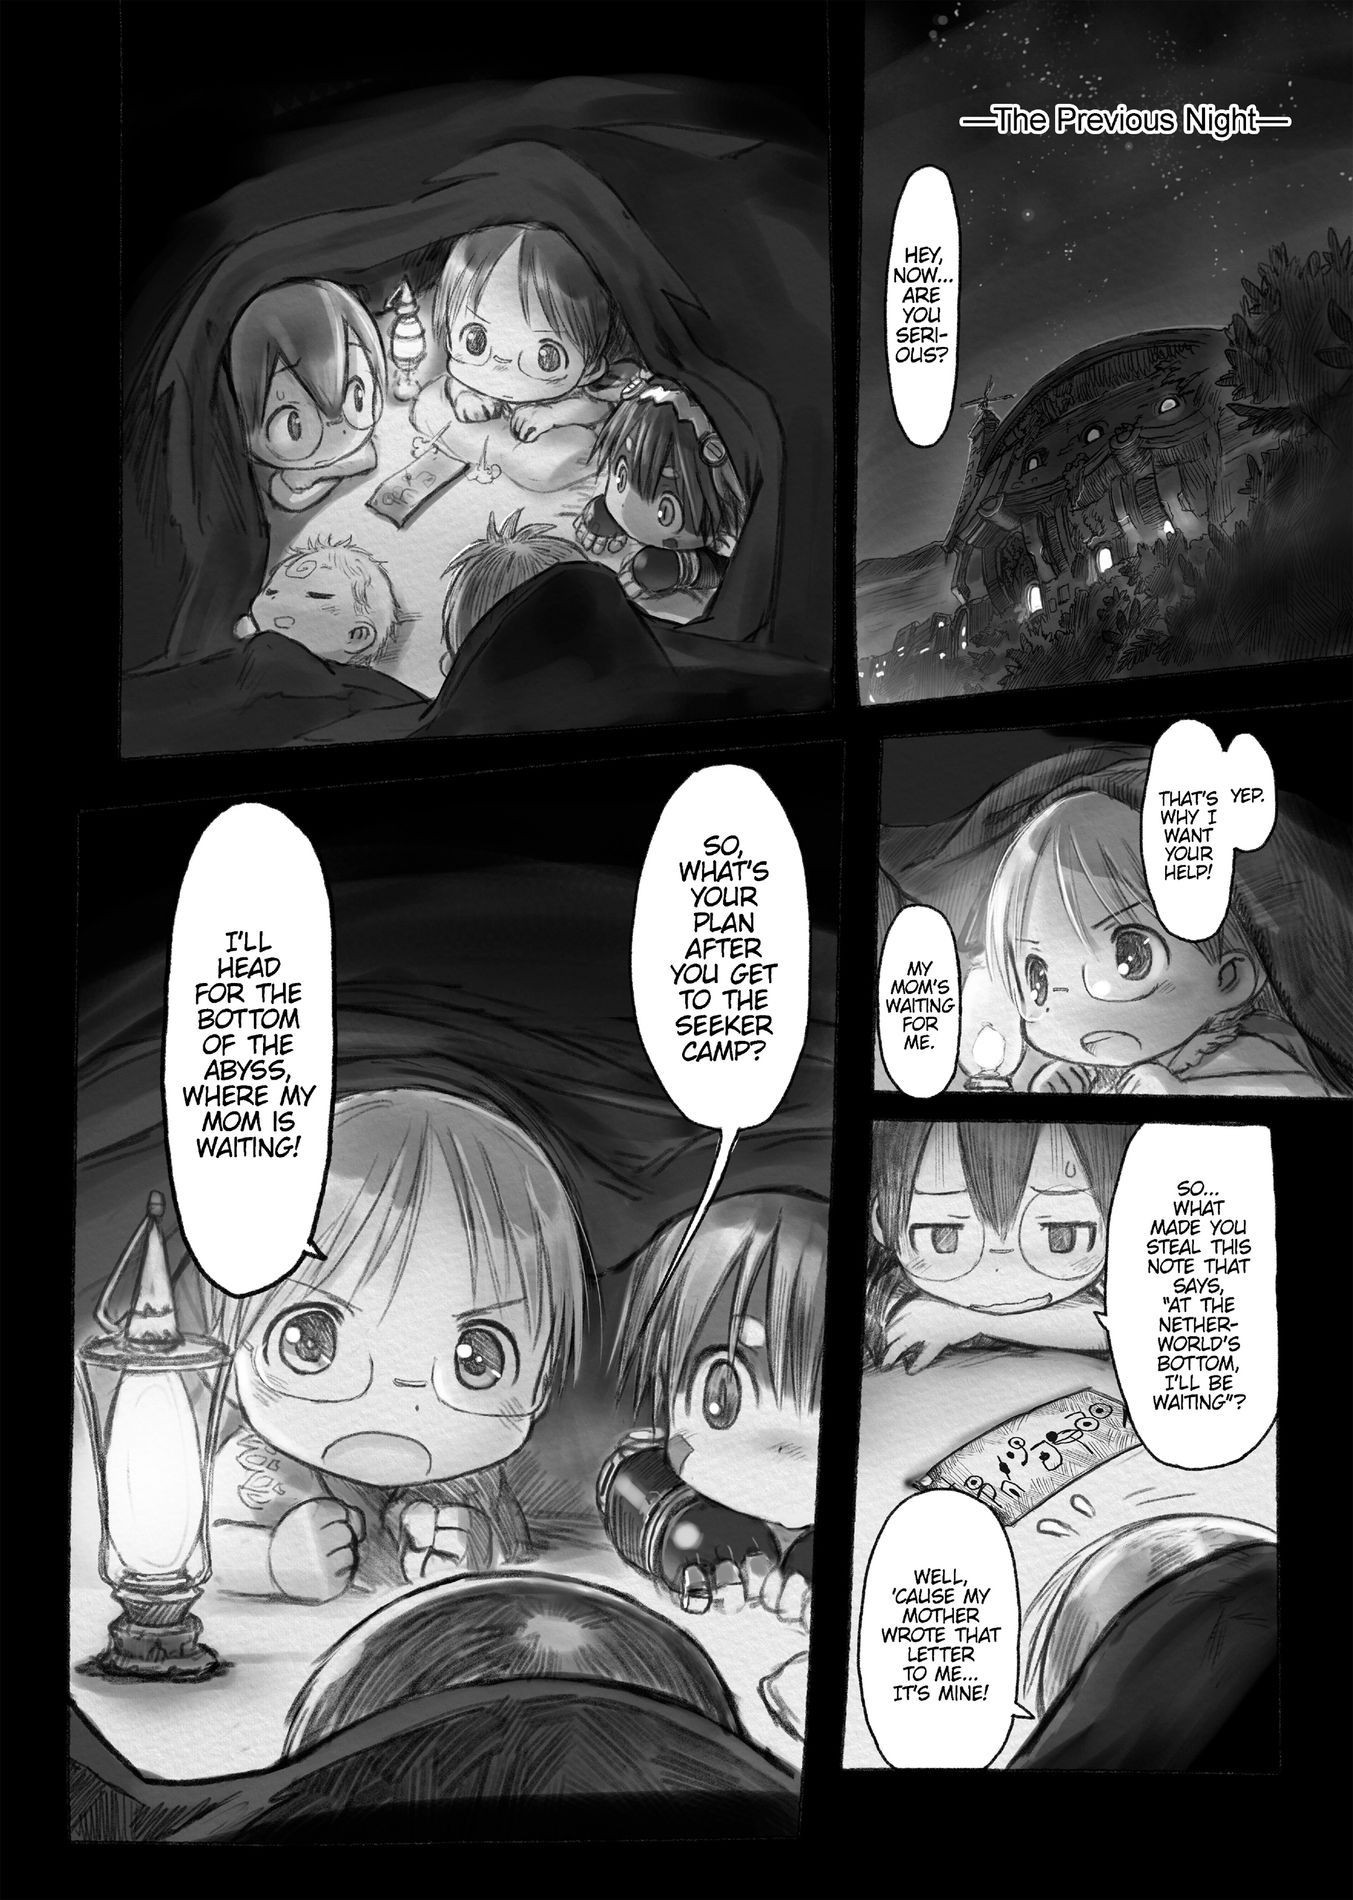 Made in Abyss chapter 63.5 translation is out! As the main group inspects a  place, an unexpected encounter leads to many new faces. - 9GAG